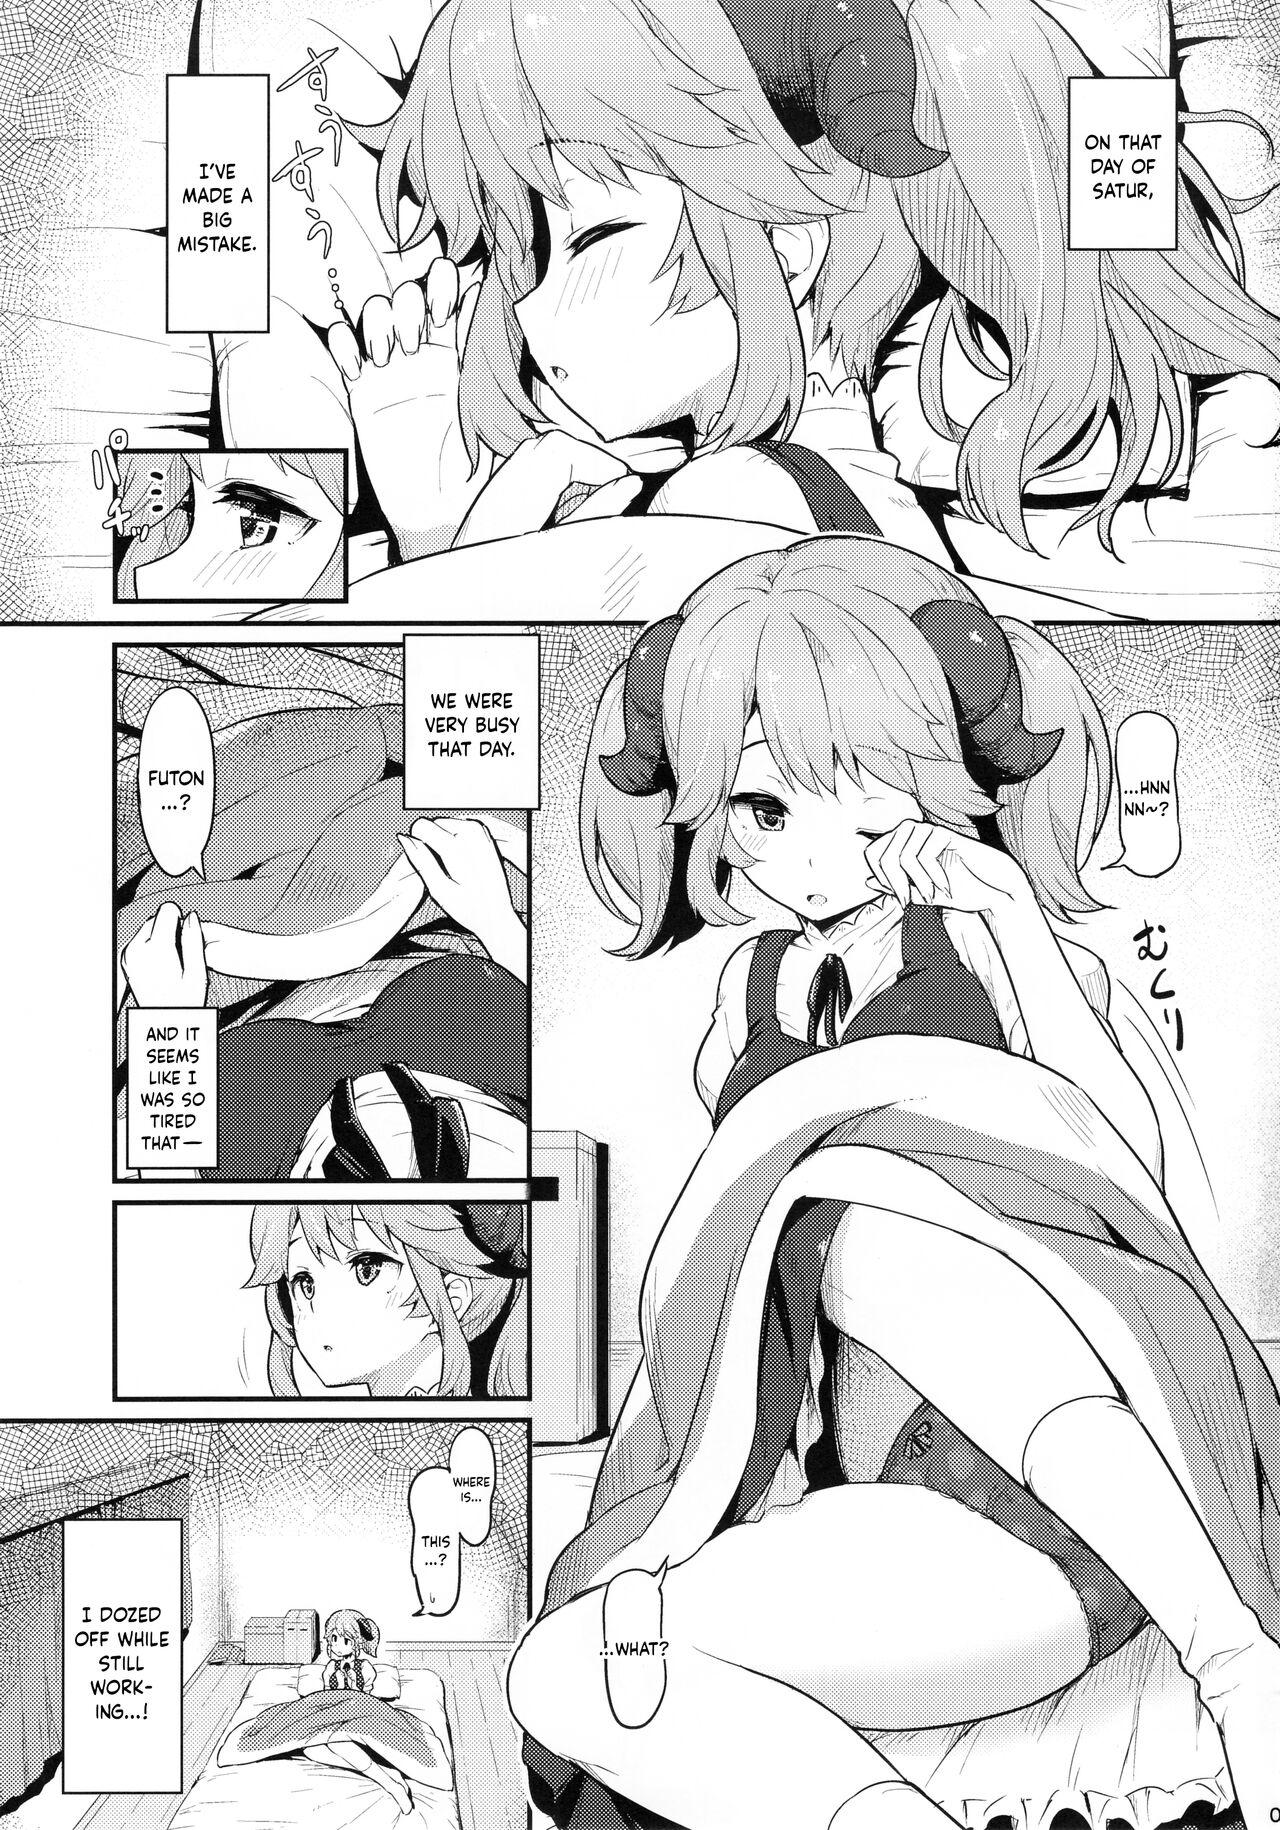 Ass Toaru Doyou no Hi | On a Certain Day of Satur - Isekai shokudou | restaurant to another world Sensual - Page 2